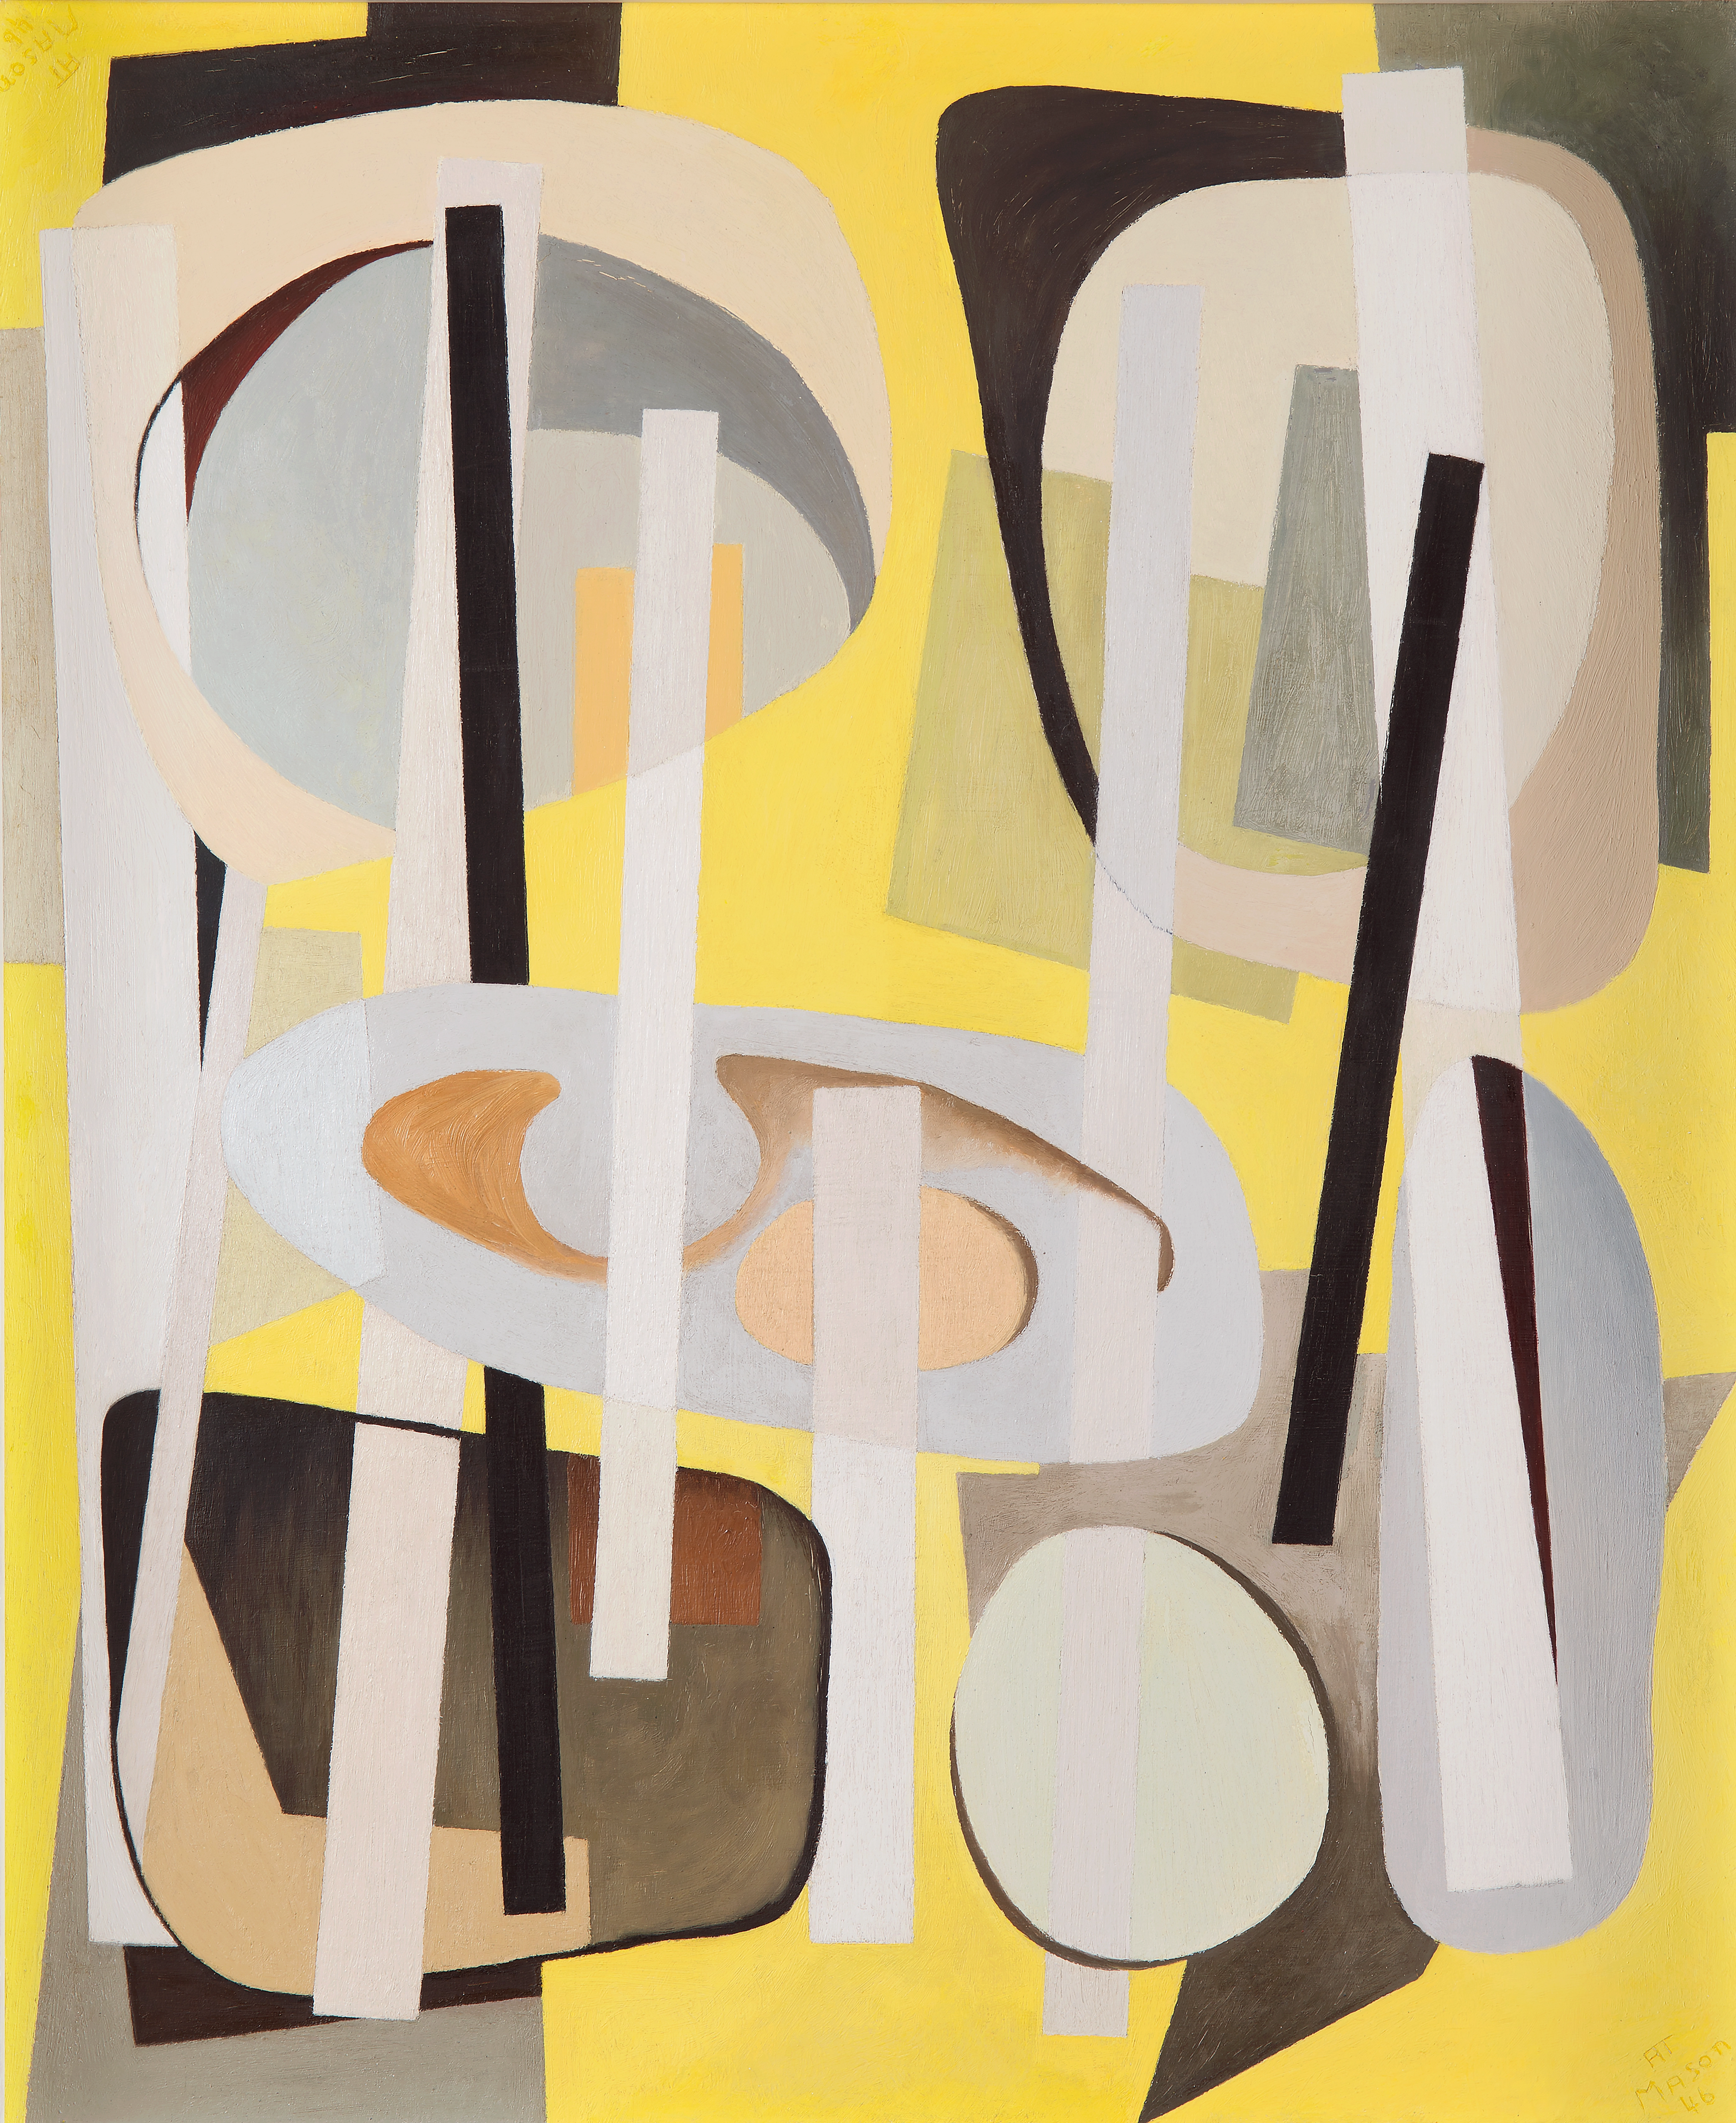 Abstract oil on canvas painting of intersecting, thin, vertical rectangles and round, organic forms. The background is a bright yellow, and the intersecting forms and predominantly shades of grey, white, black, brown, and various shades of beige.